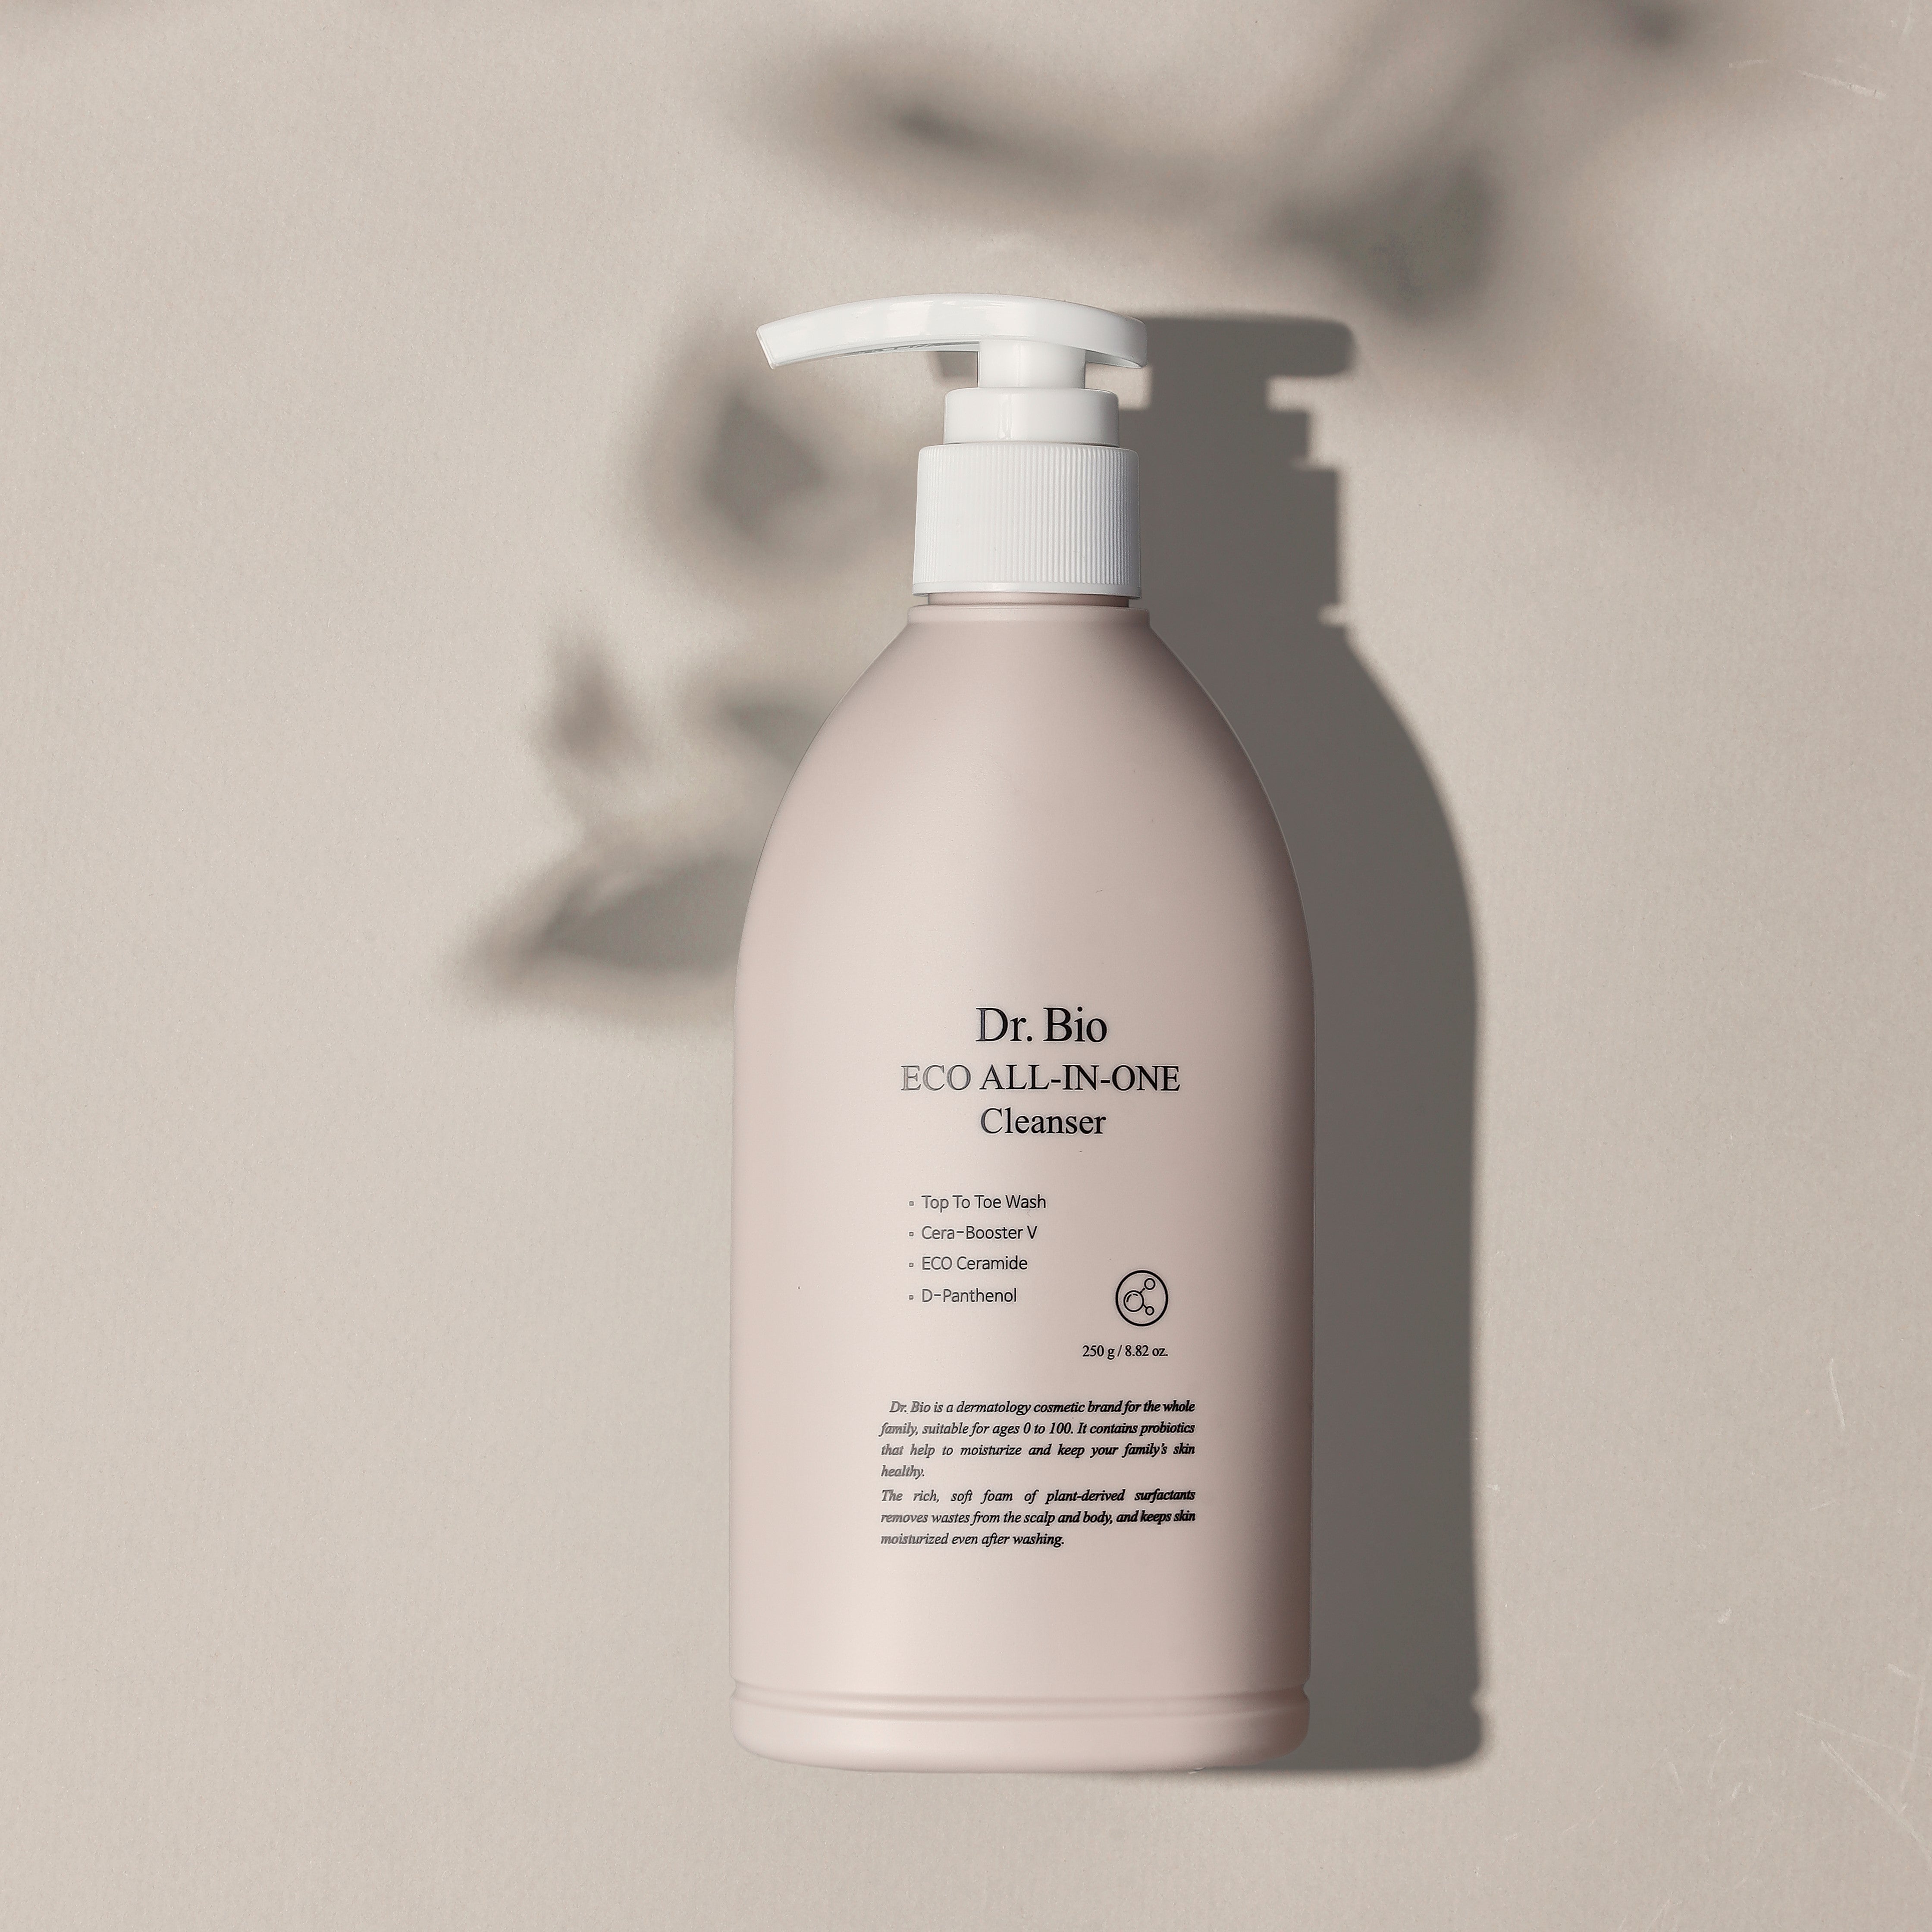 Eco All-in-One Cleanser